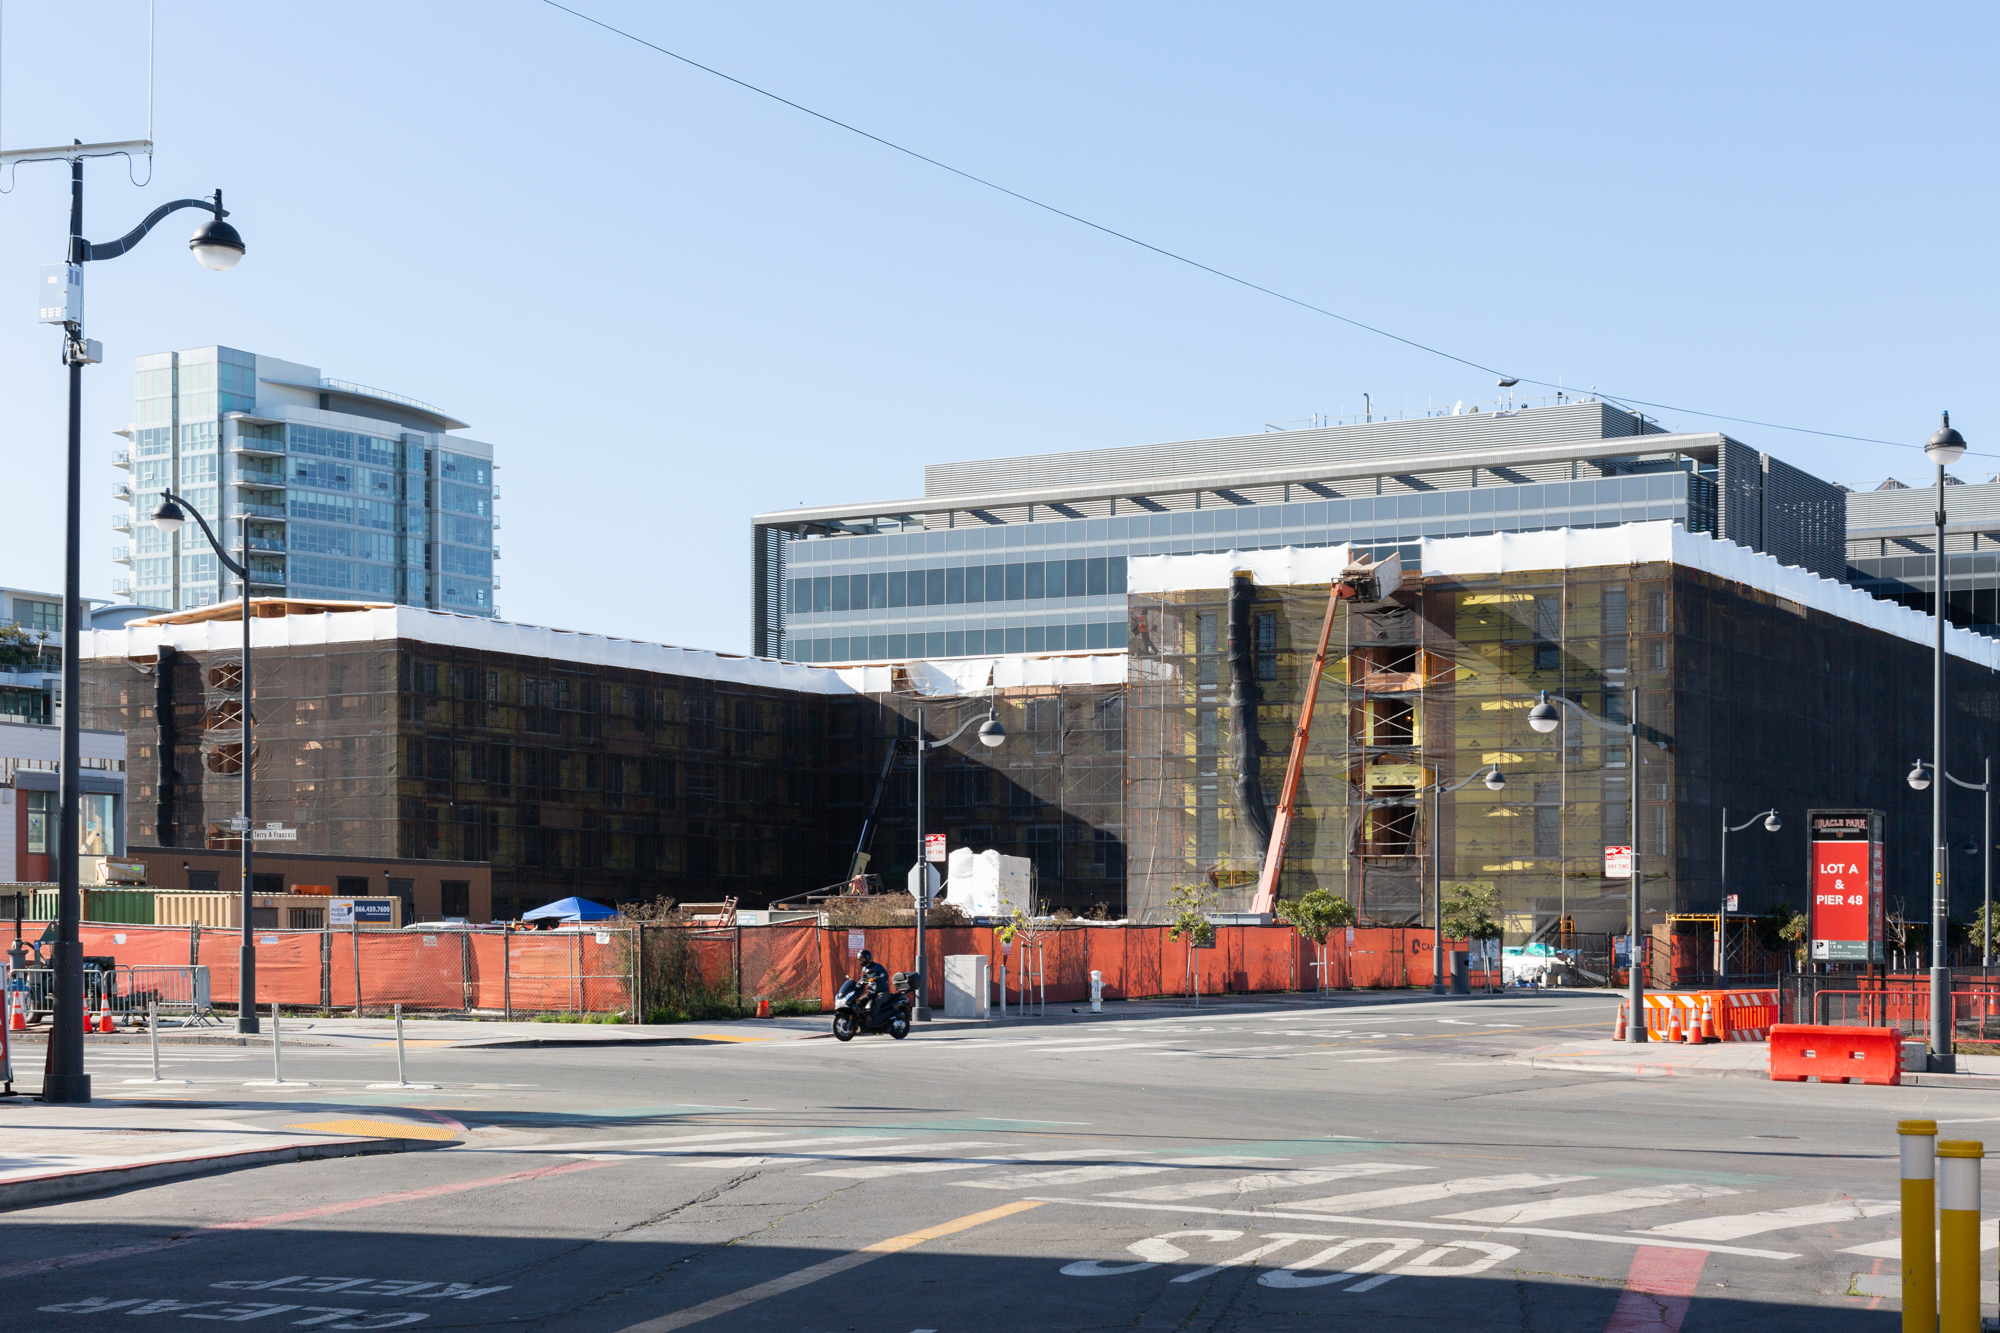 Mission Bay Block 9 construction update, image by Andrew Campbell Nelson